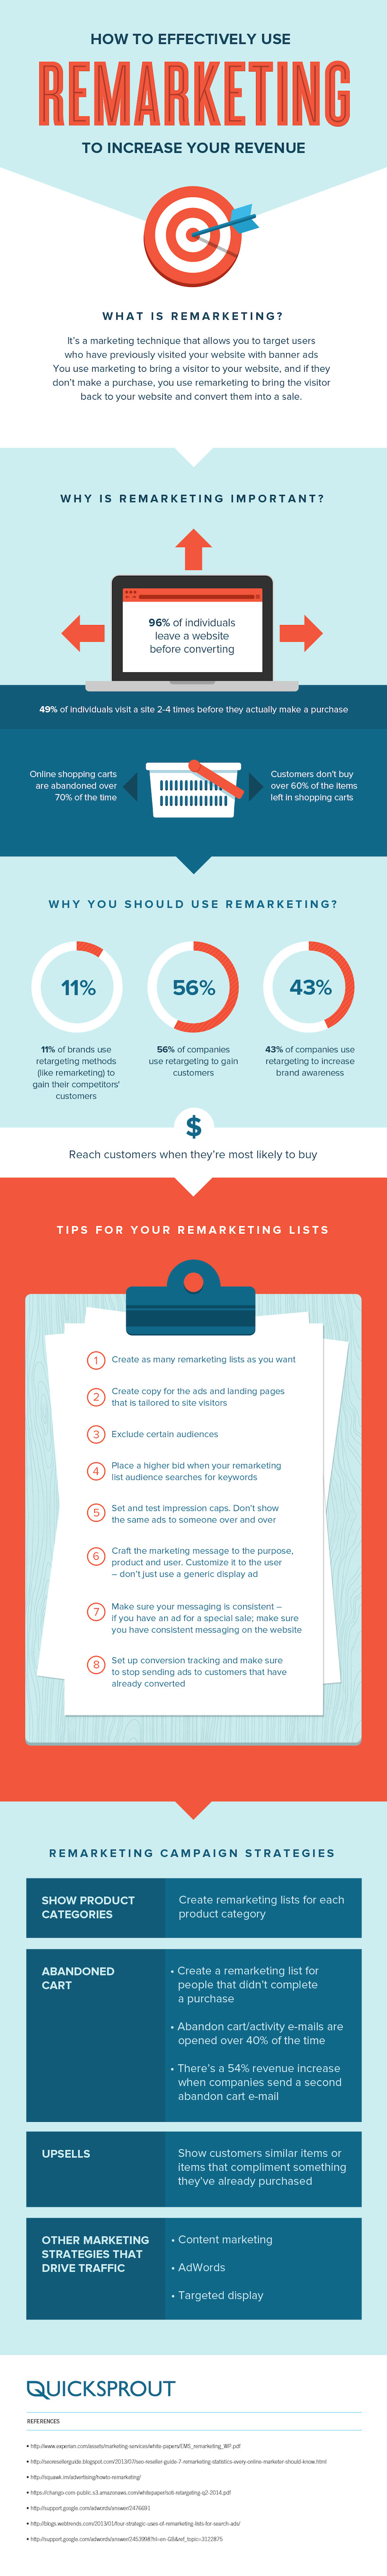 How to Effectively Use Remarketing to Increase Your Revenue